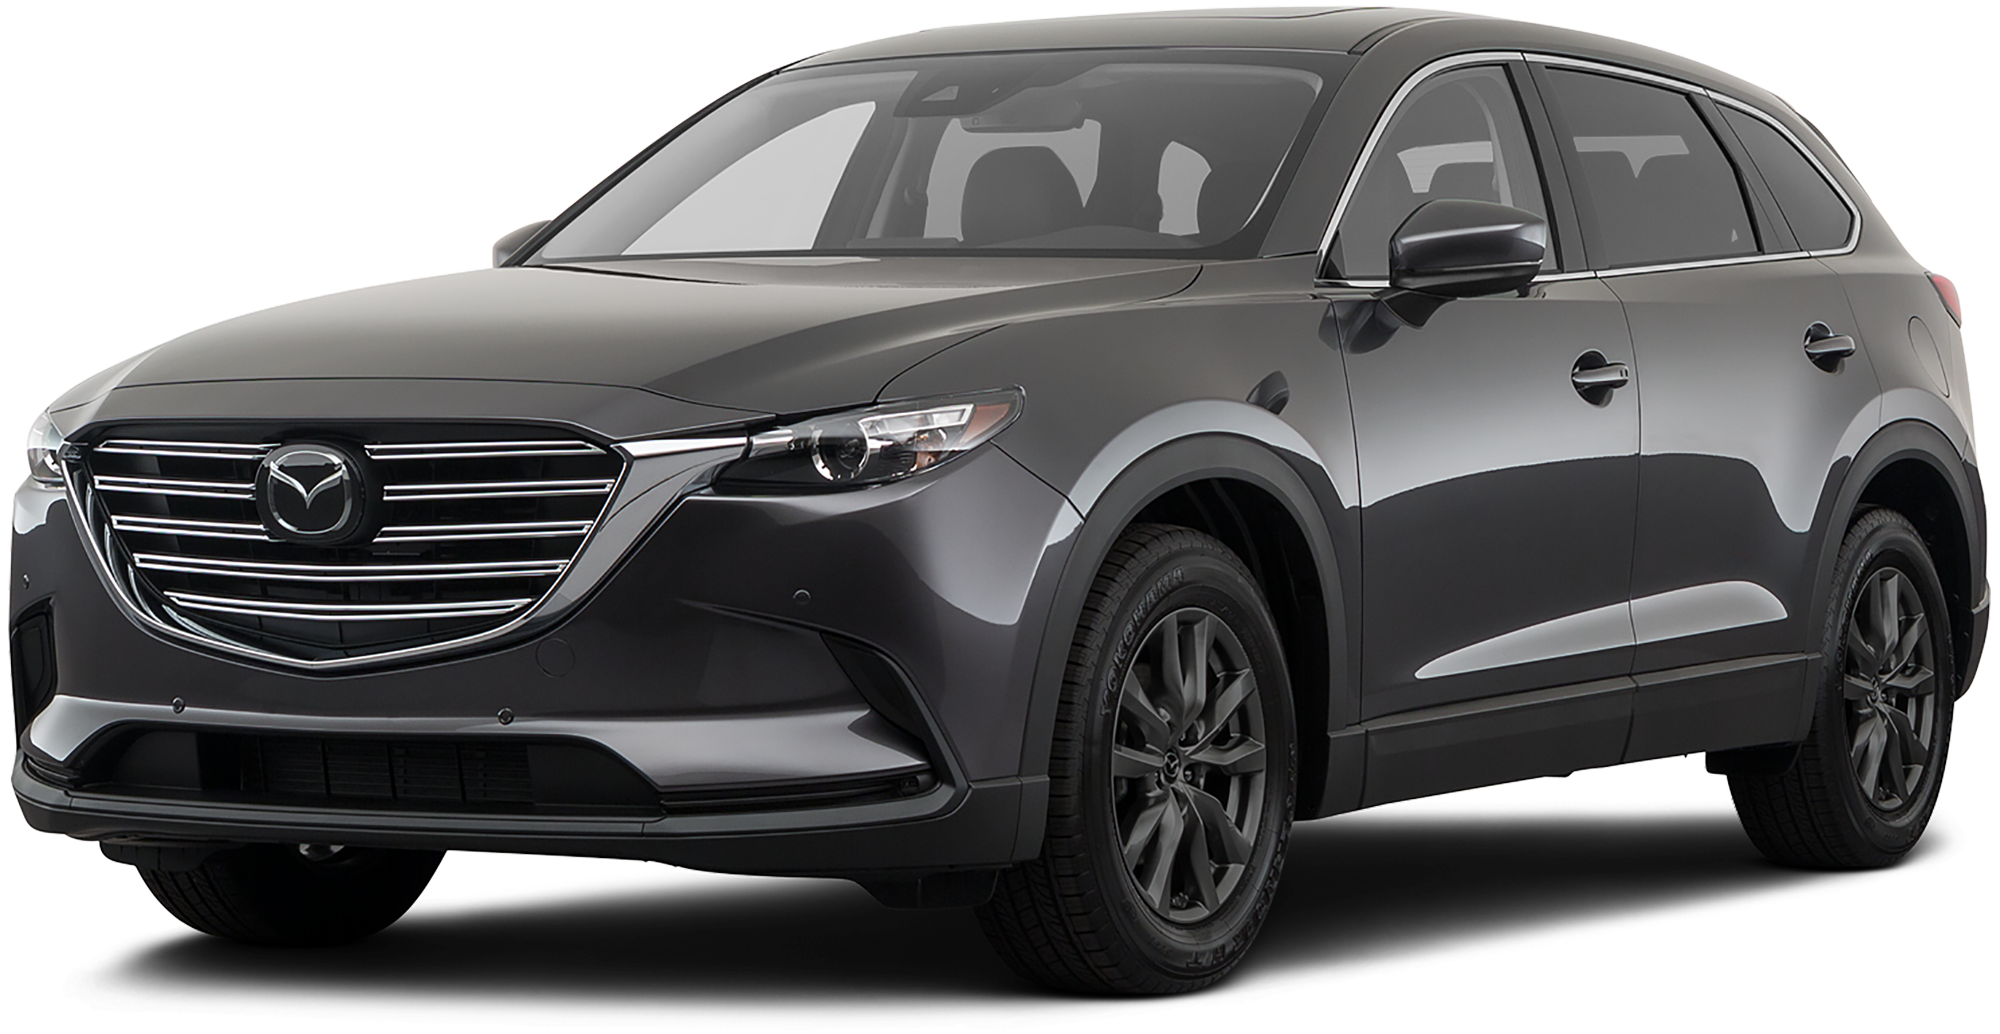 Mazda Mazda Cx 9 Incentives Specials Offers In Fort Wayne In